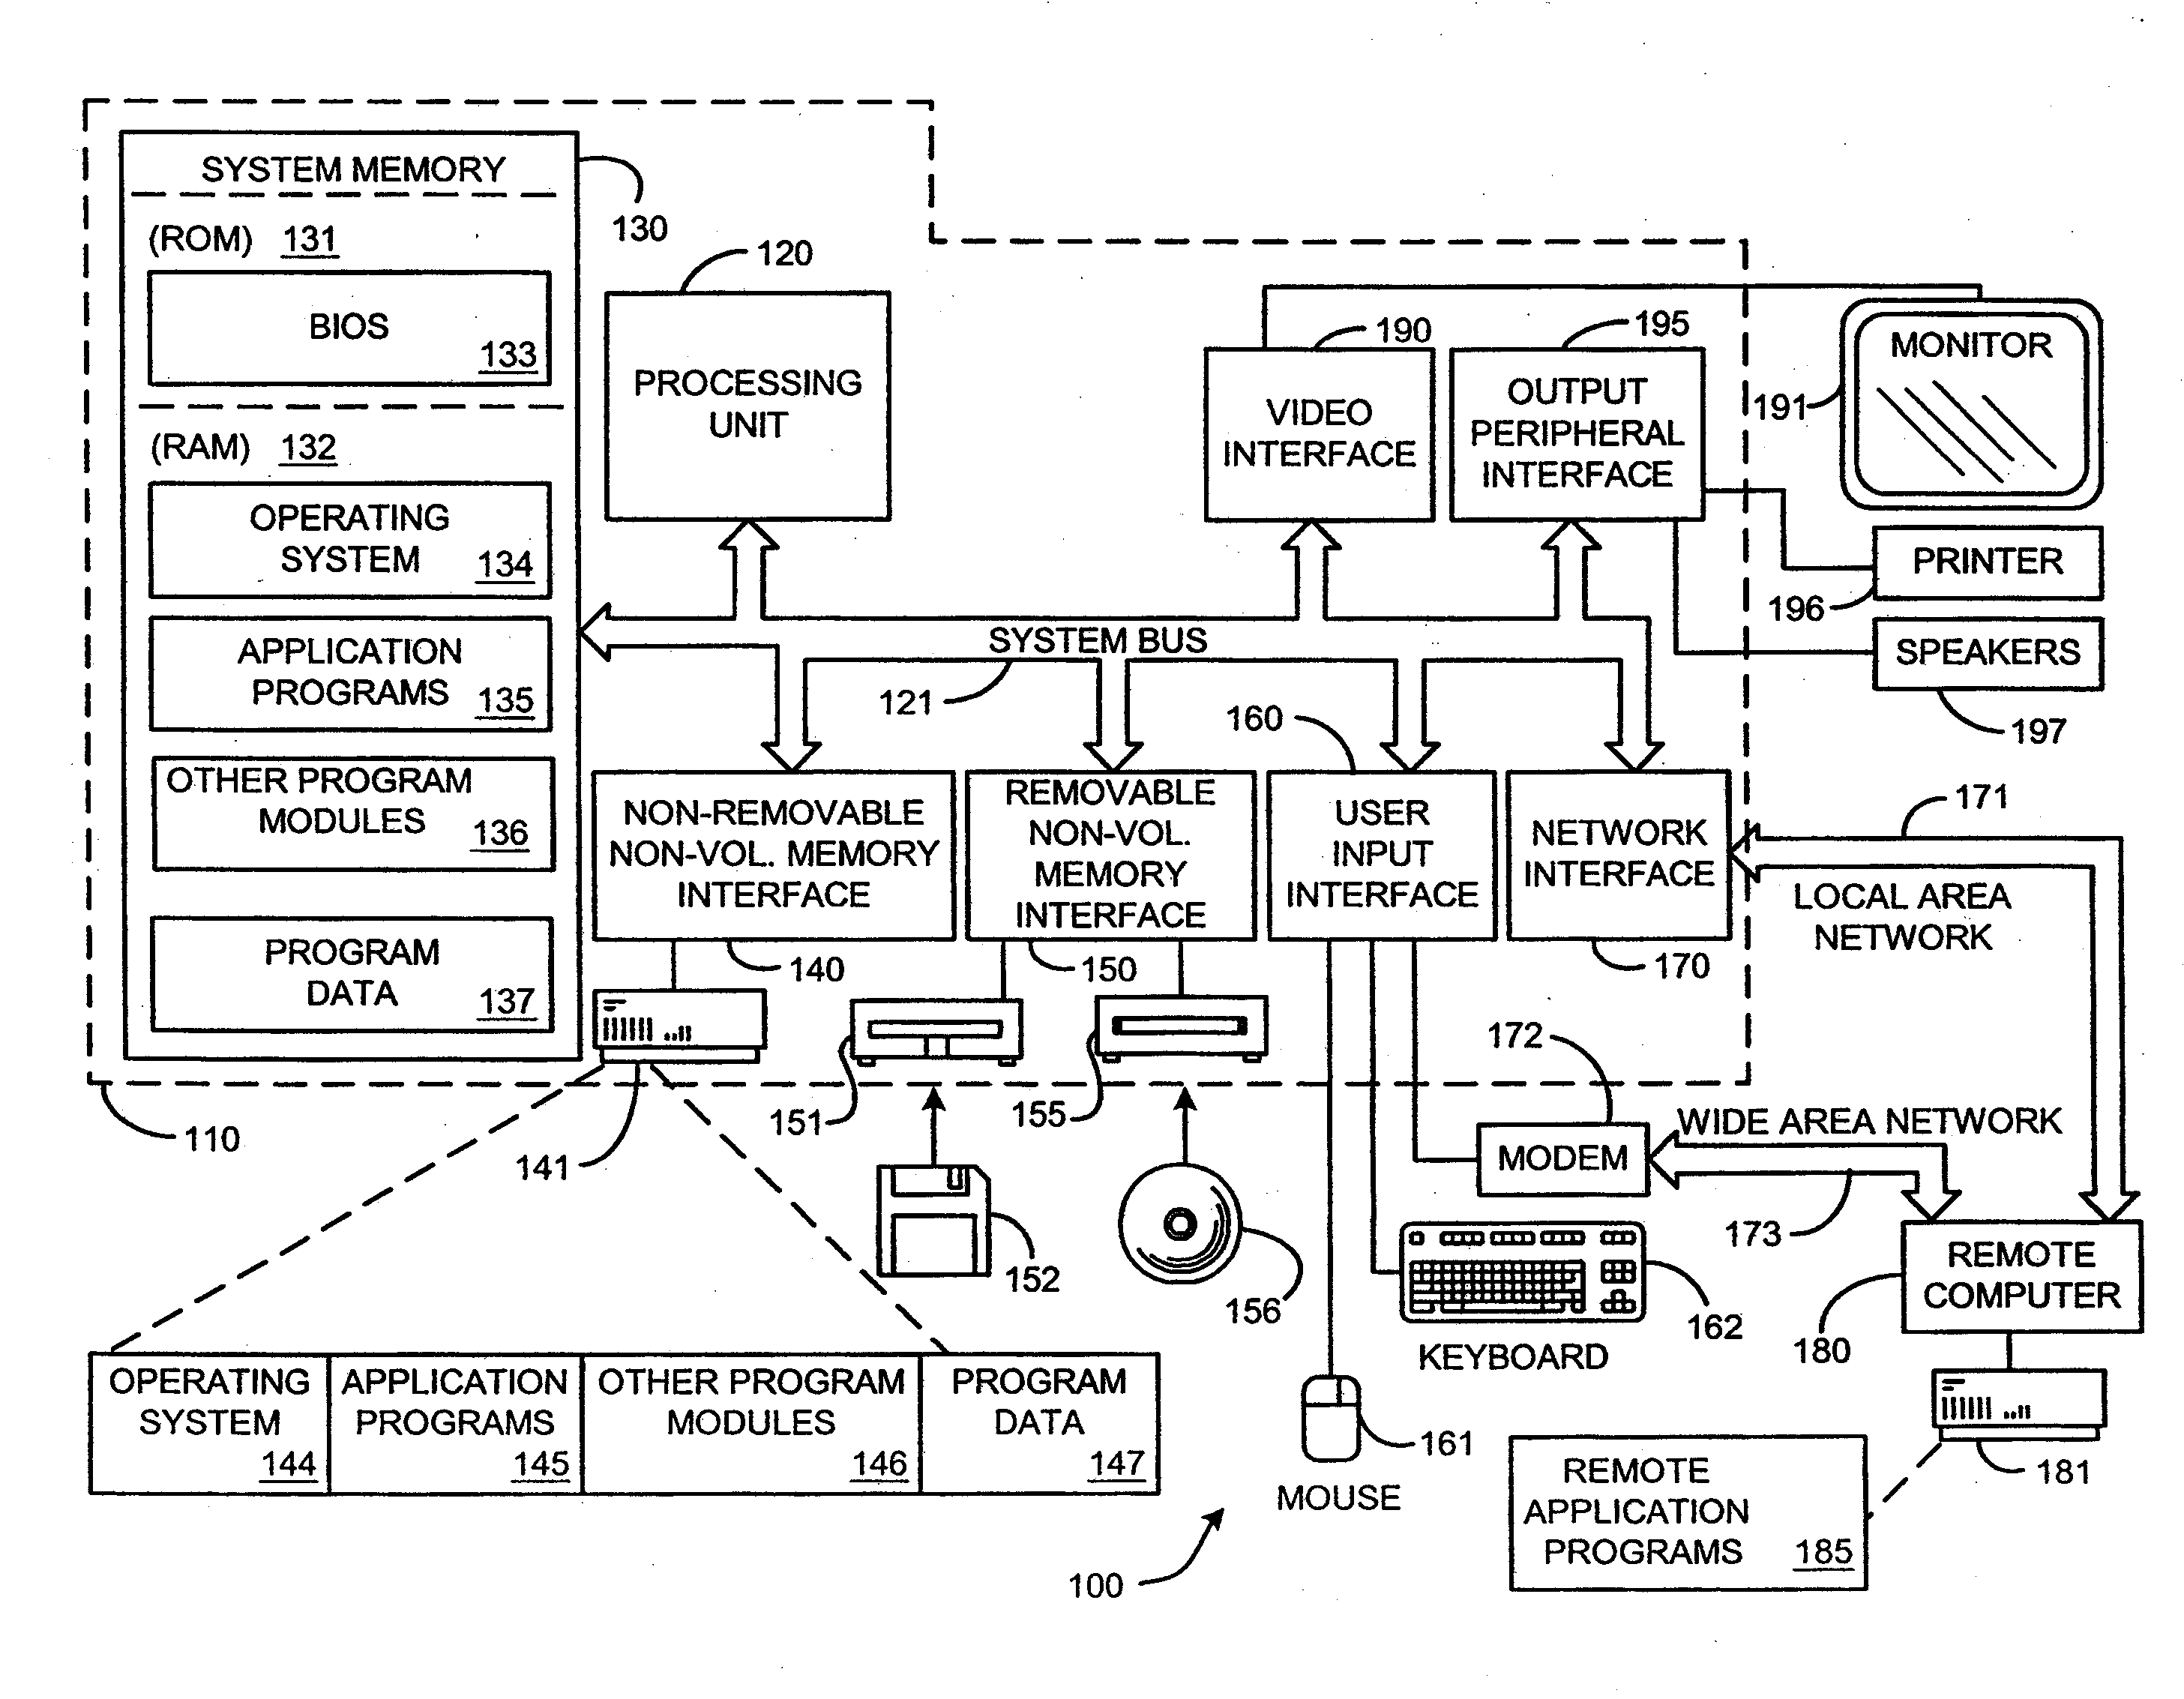 Enhanced telephony computer user interface allowing user interaction and control of a telephone using a personal computer